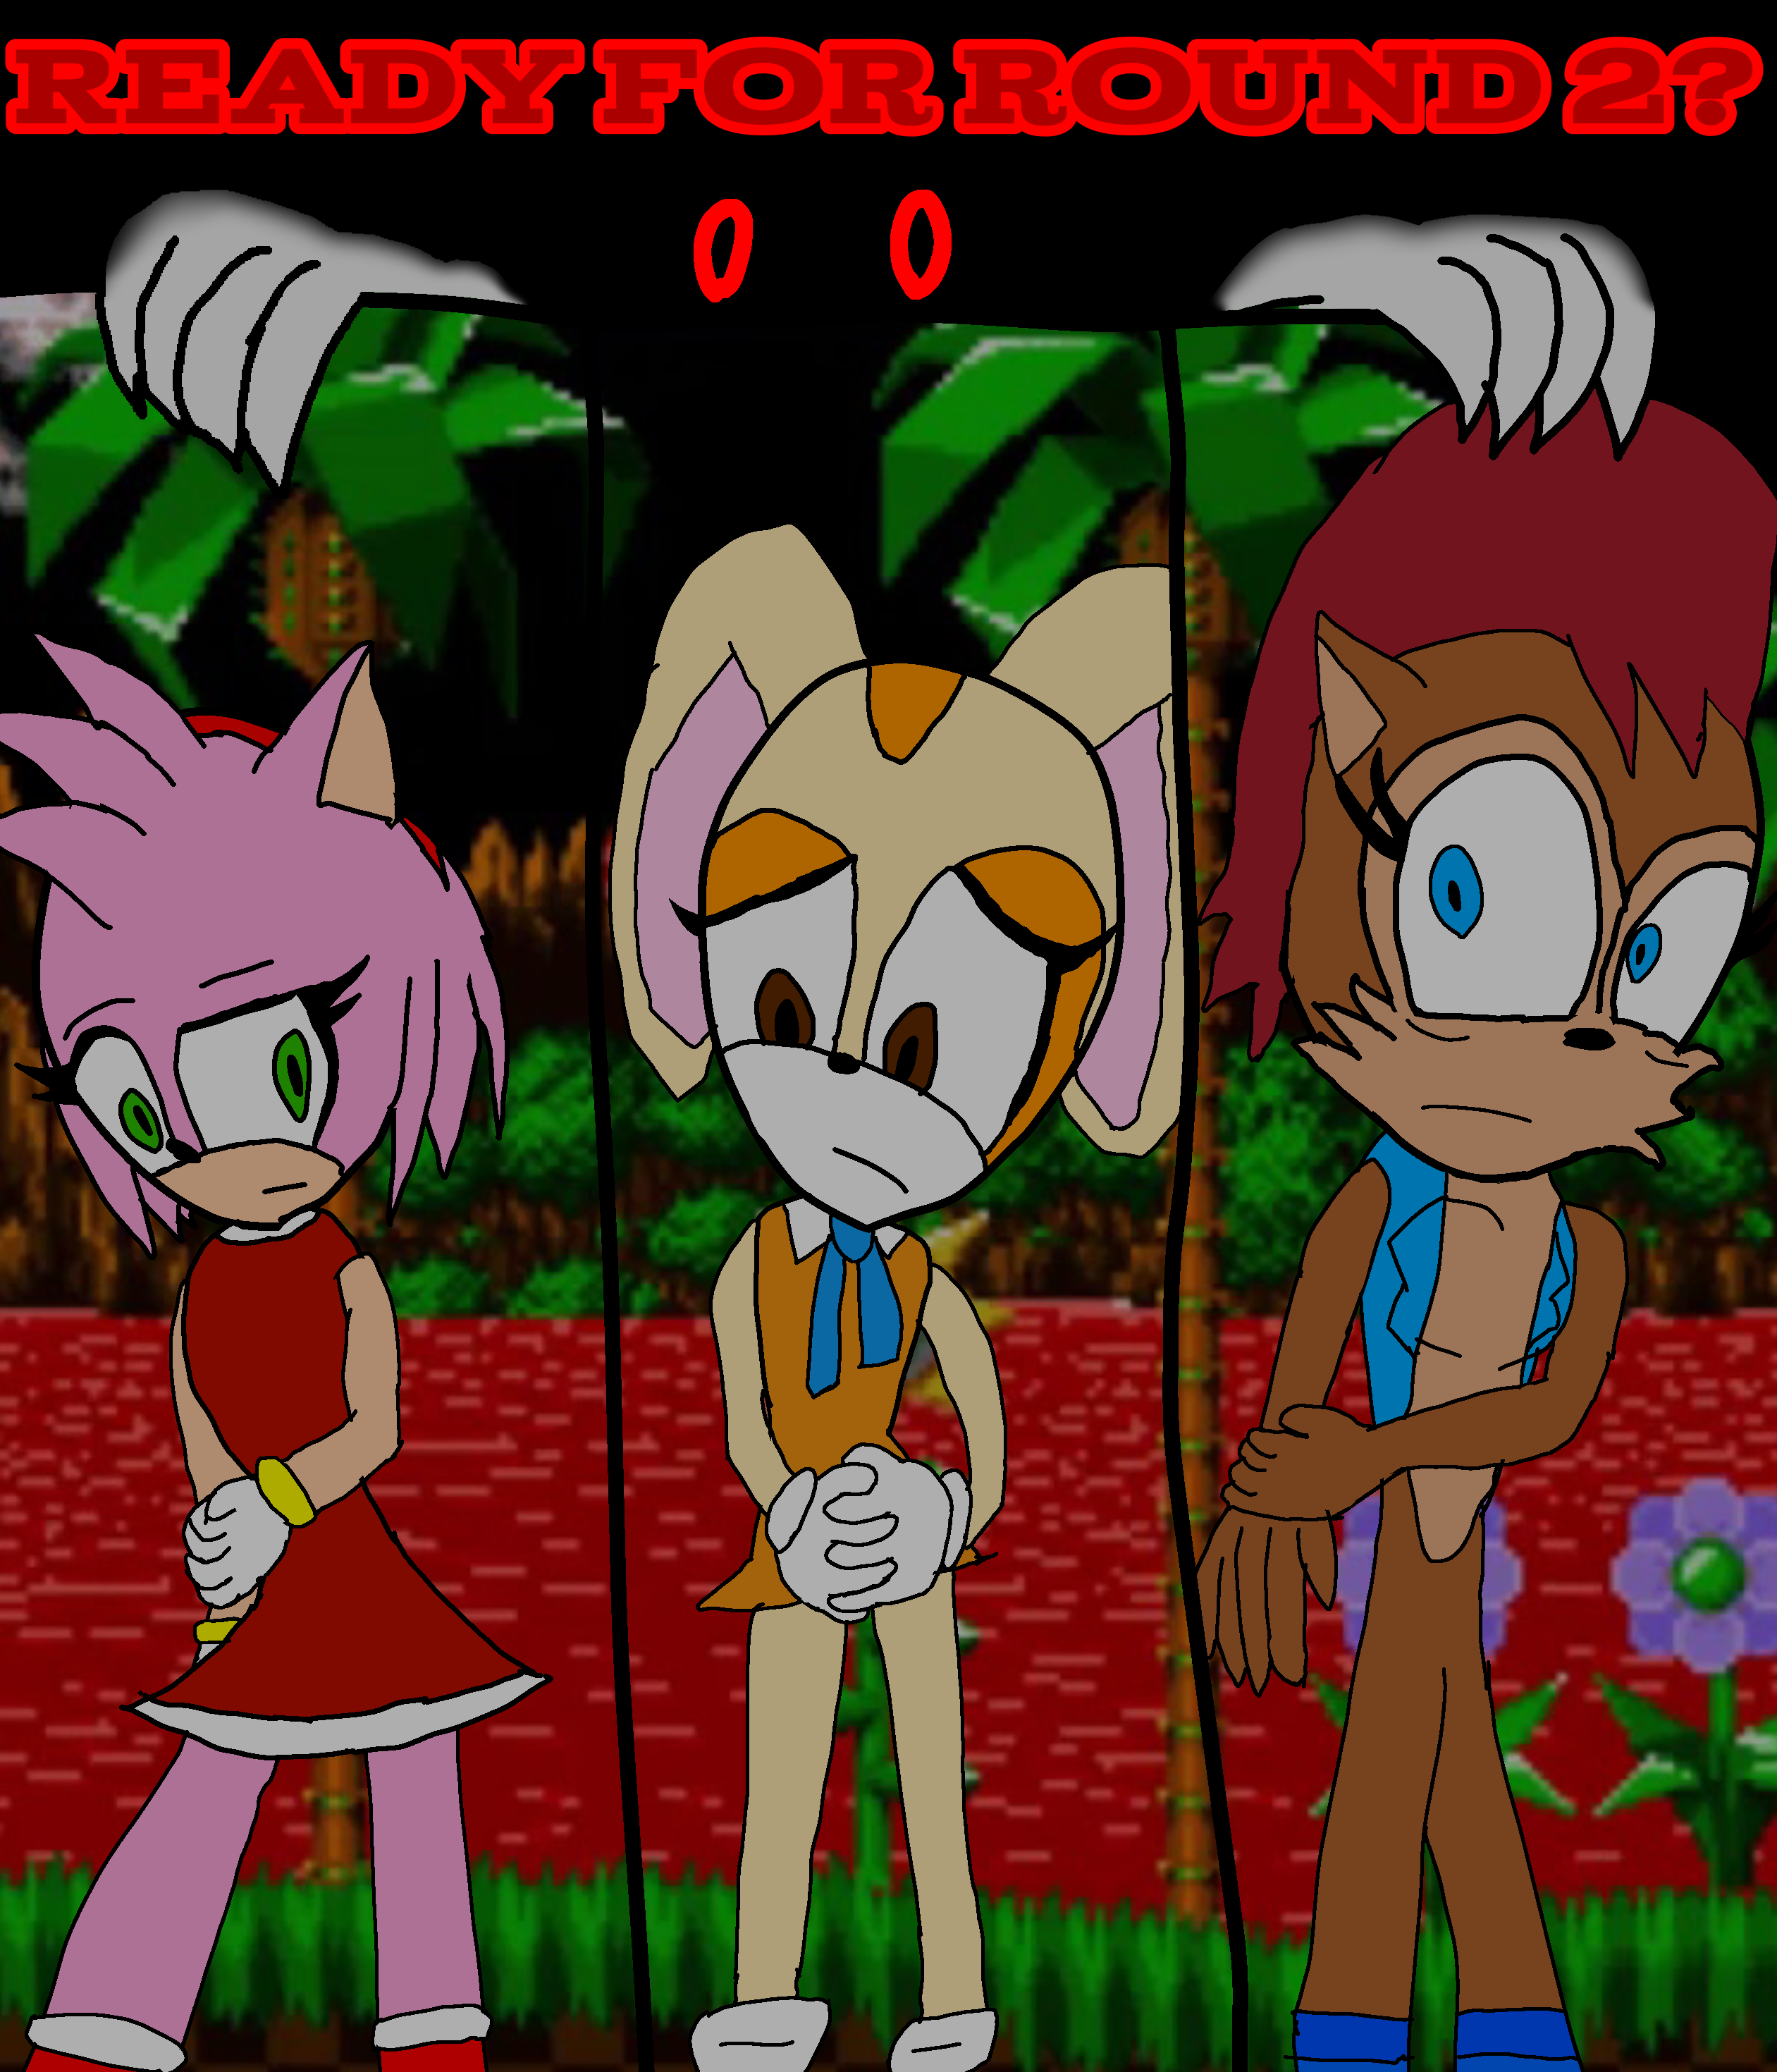 GAME OVER (Sonic.exe/sally.exe) by Frost-Animation on DeviantArt